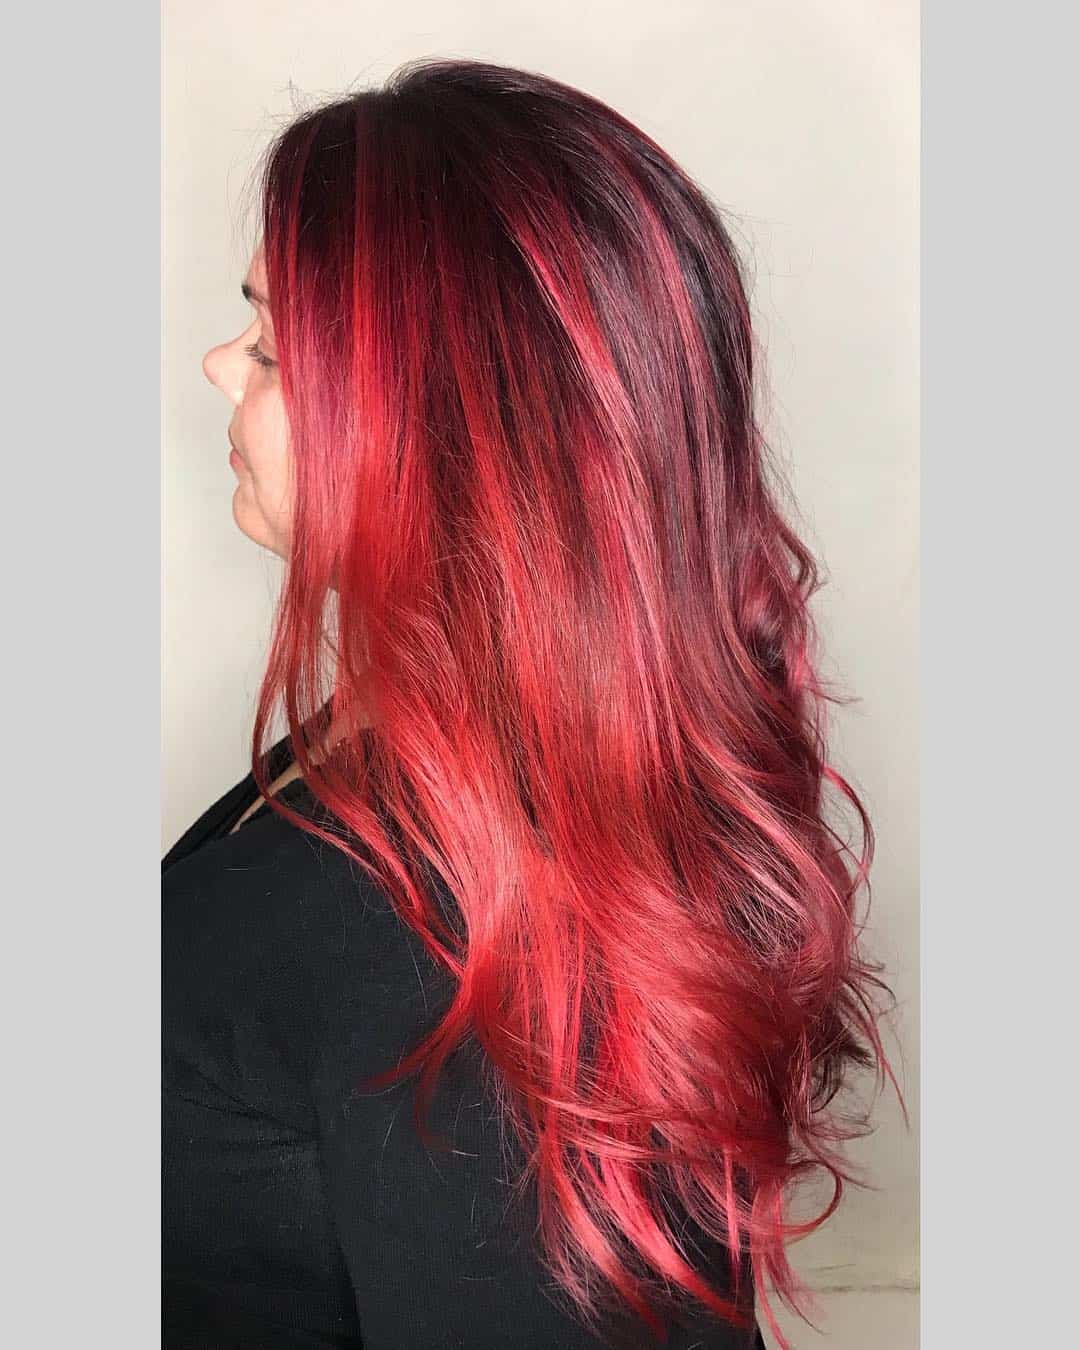 red hair with highlights